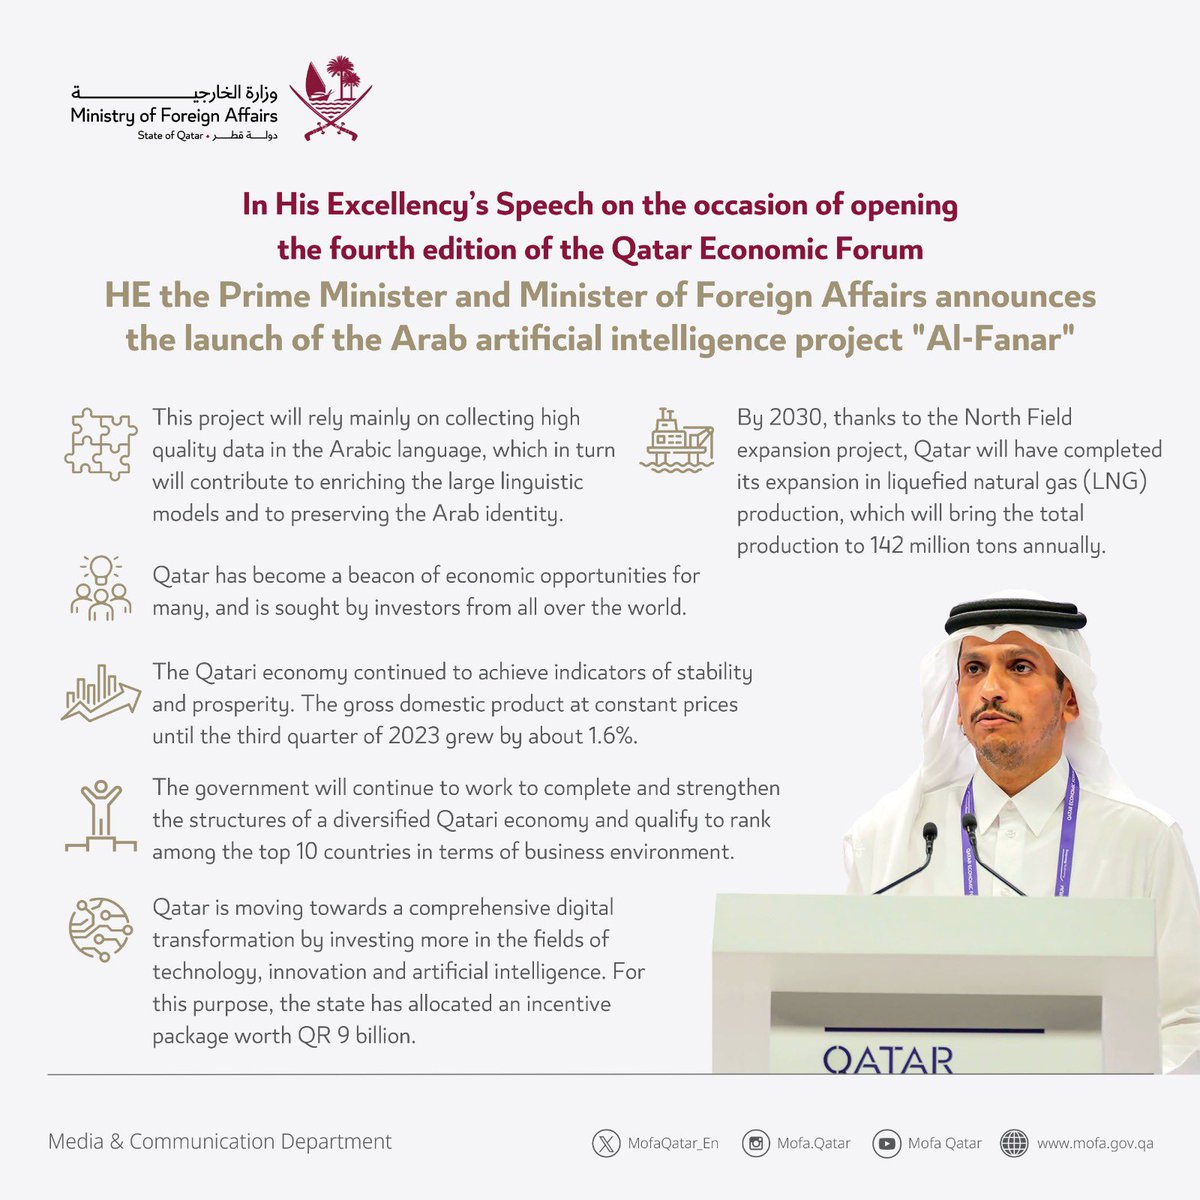 In His Excellency’s Speech on the occasion of opening the fourth edition of the #QatarEconomicForum HE the Prime Minister and Minister of Foreign Affairs announces the launch of the Arab artificial intelligence project 'Al-Fanar'. #MOFAQatar